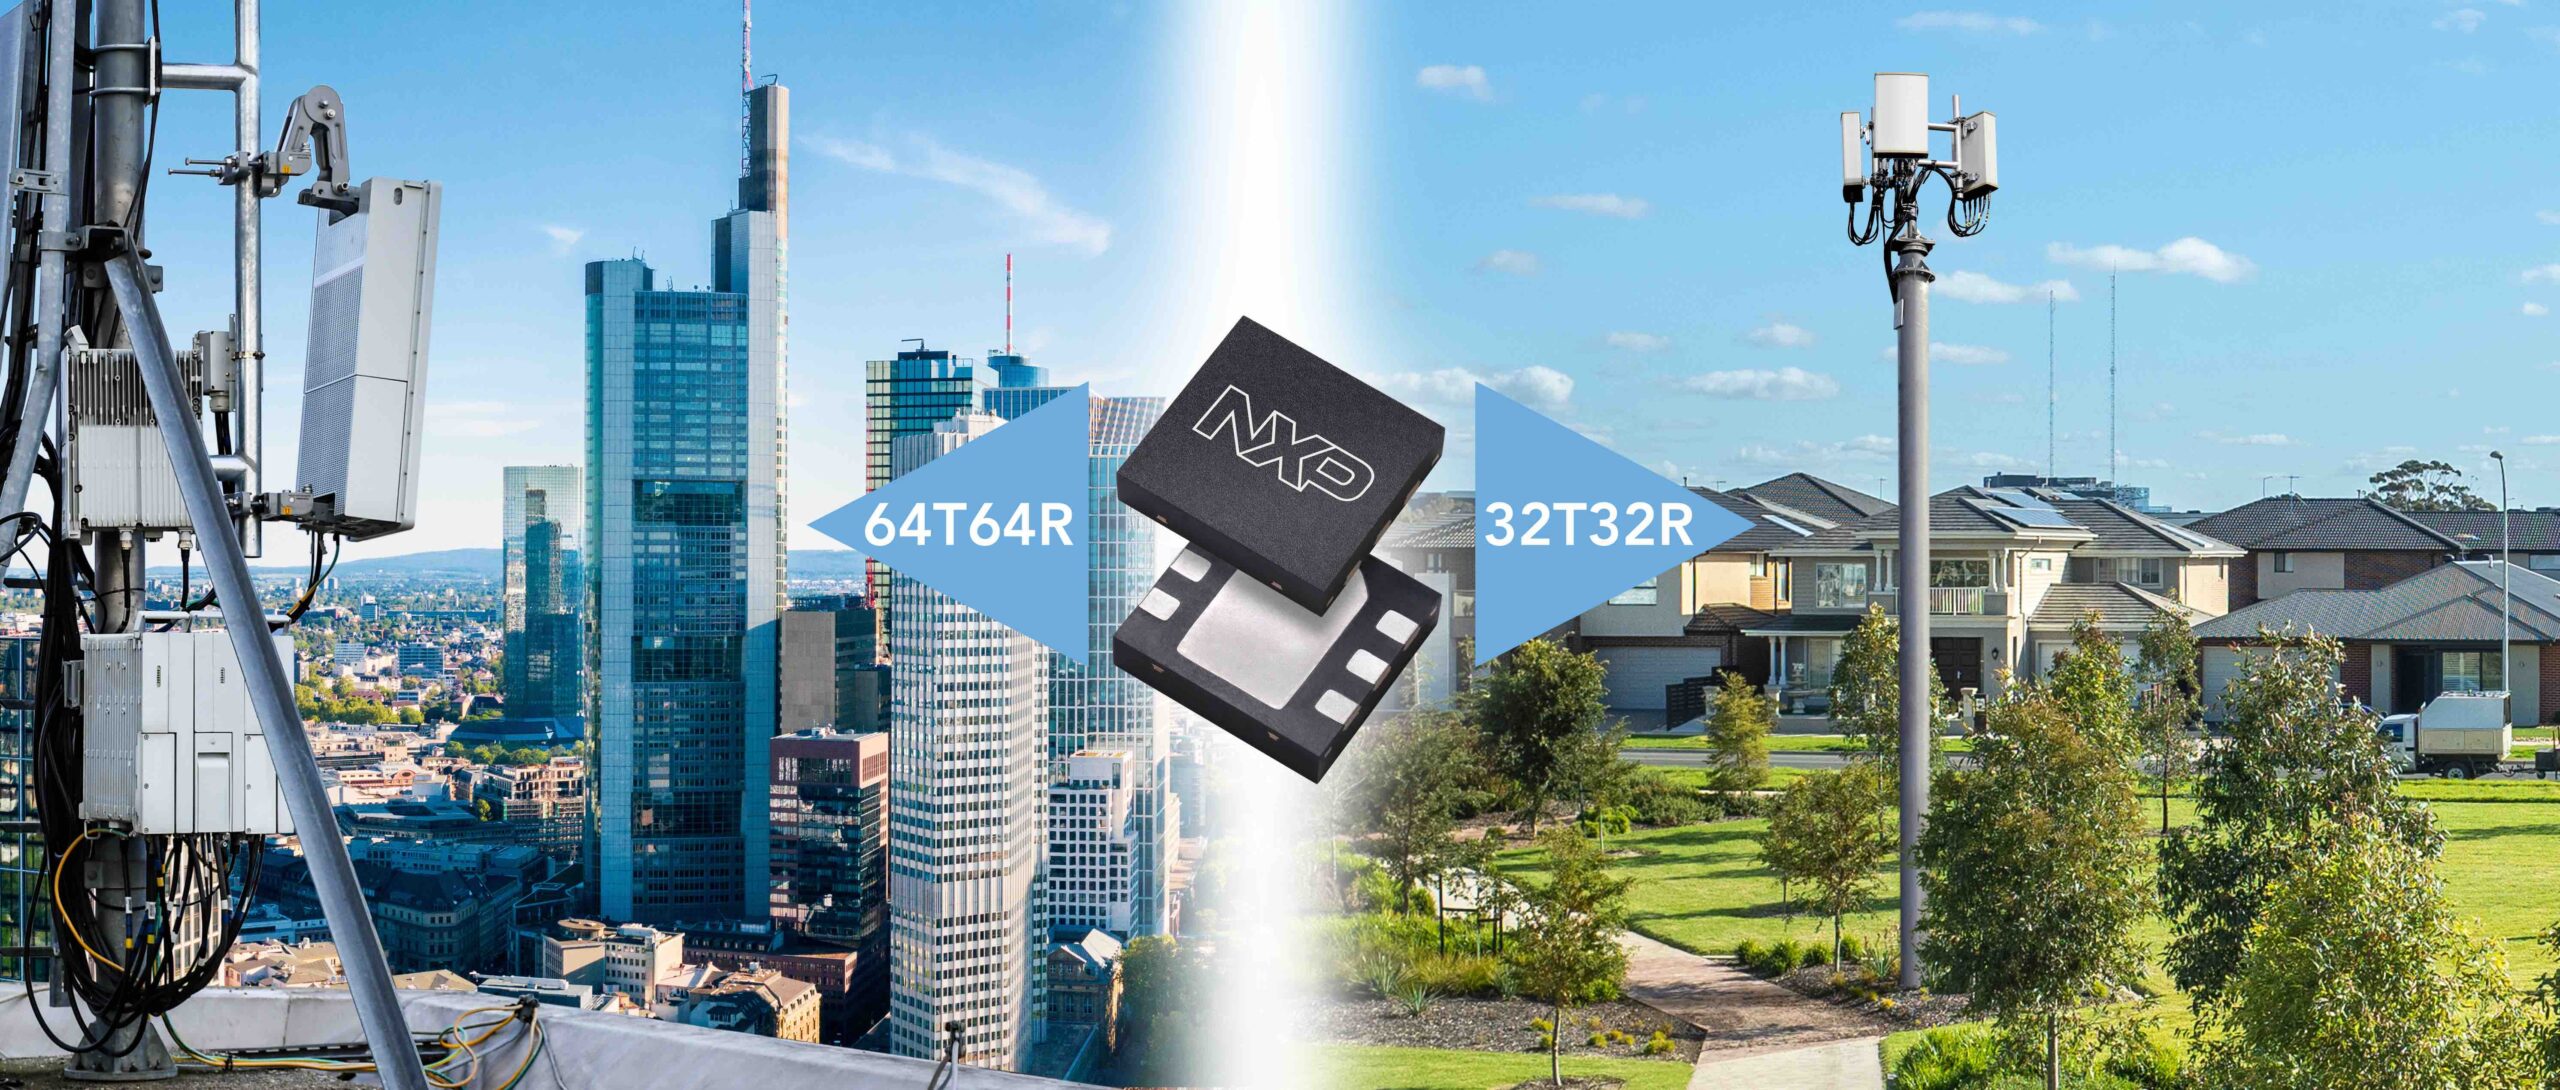 RF power discrete solutions for 32T32R active antenna systems